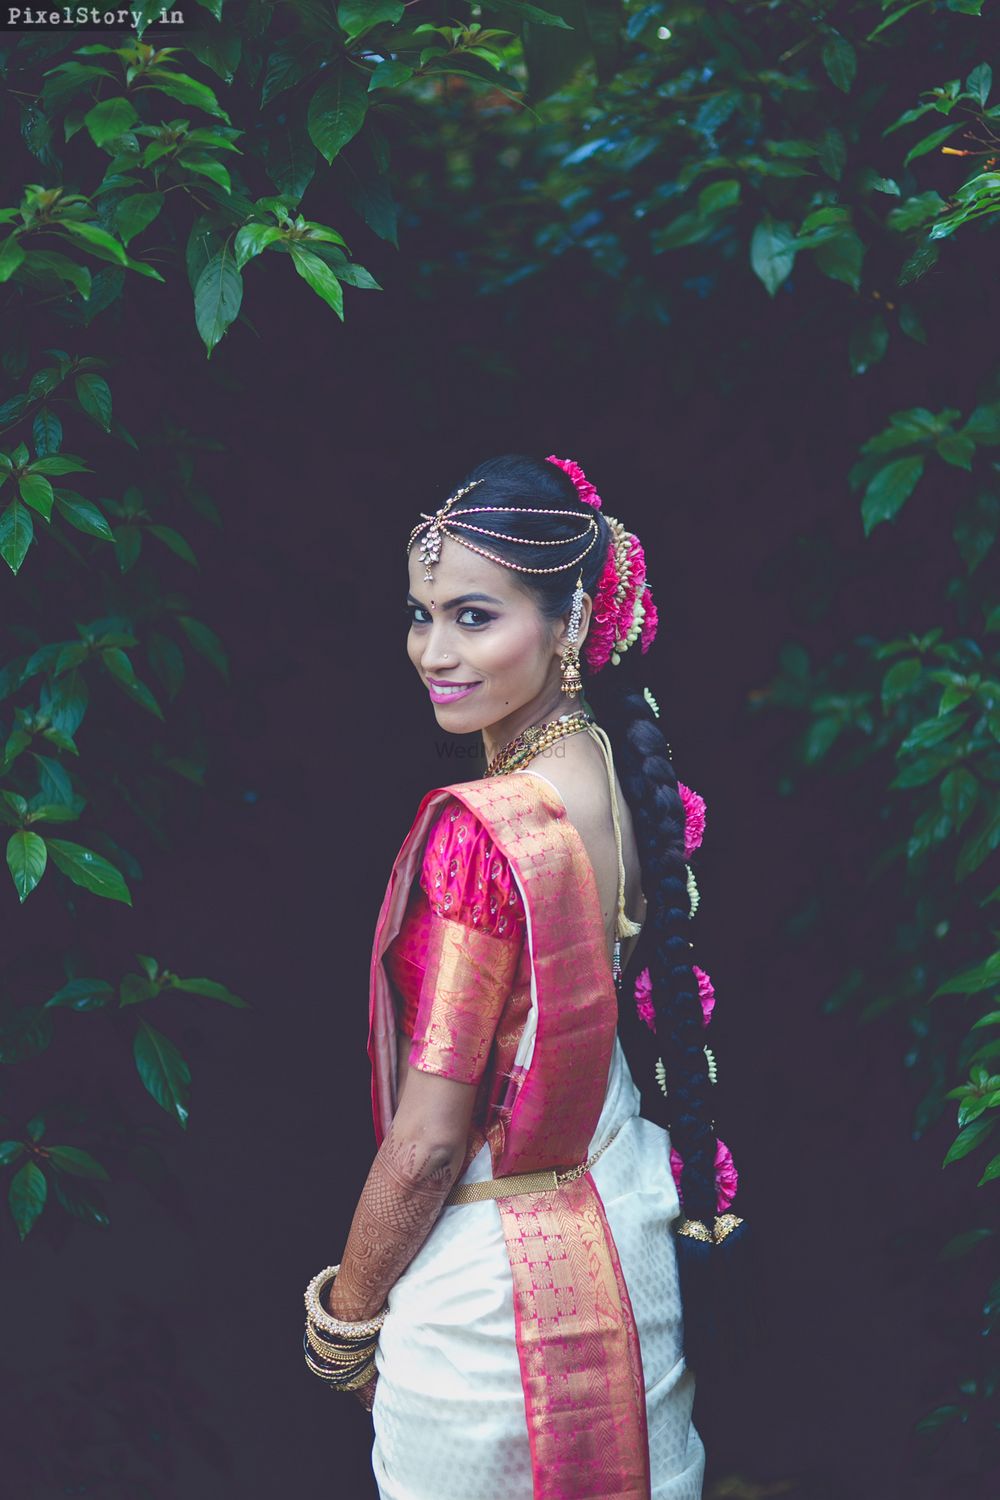 Photo From Intimate kannadiga wedding at Elements celebrate  - By Pixelstory.in